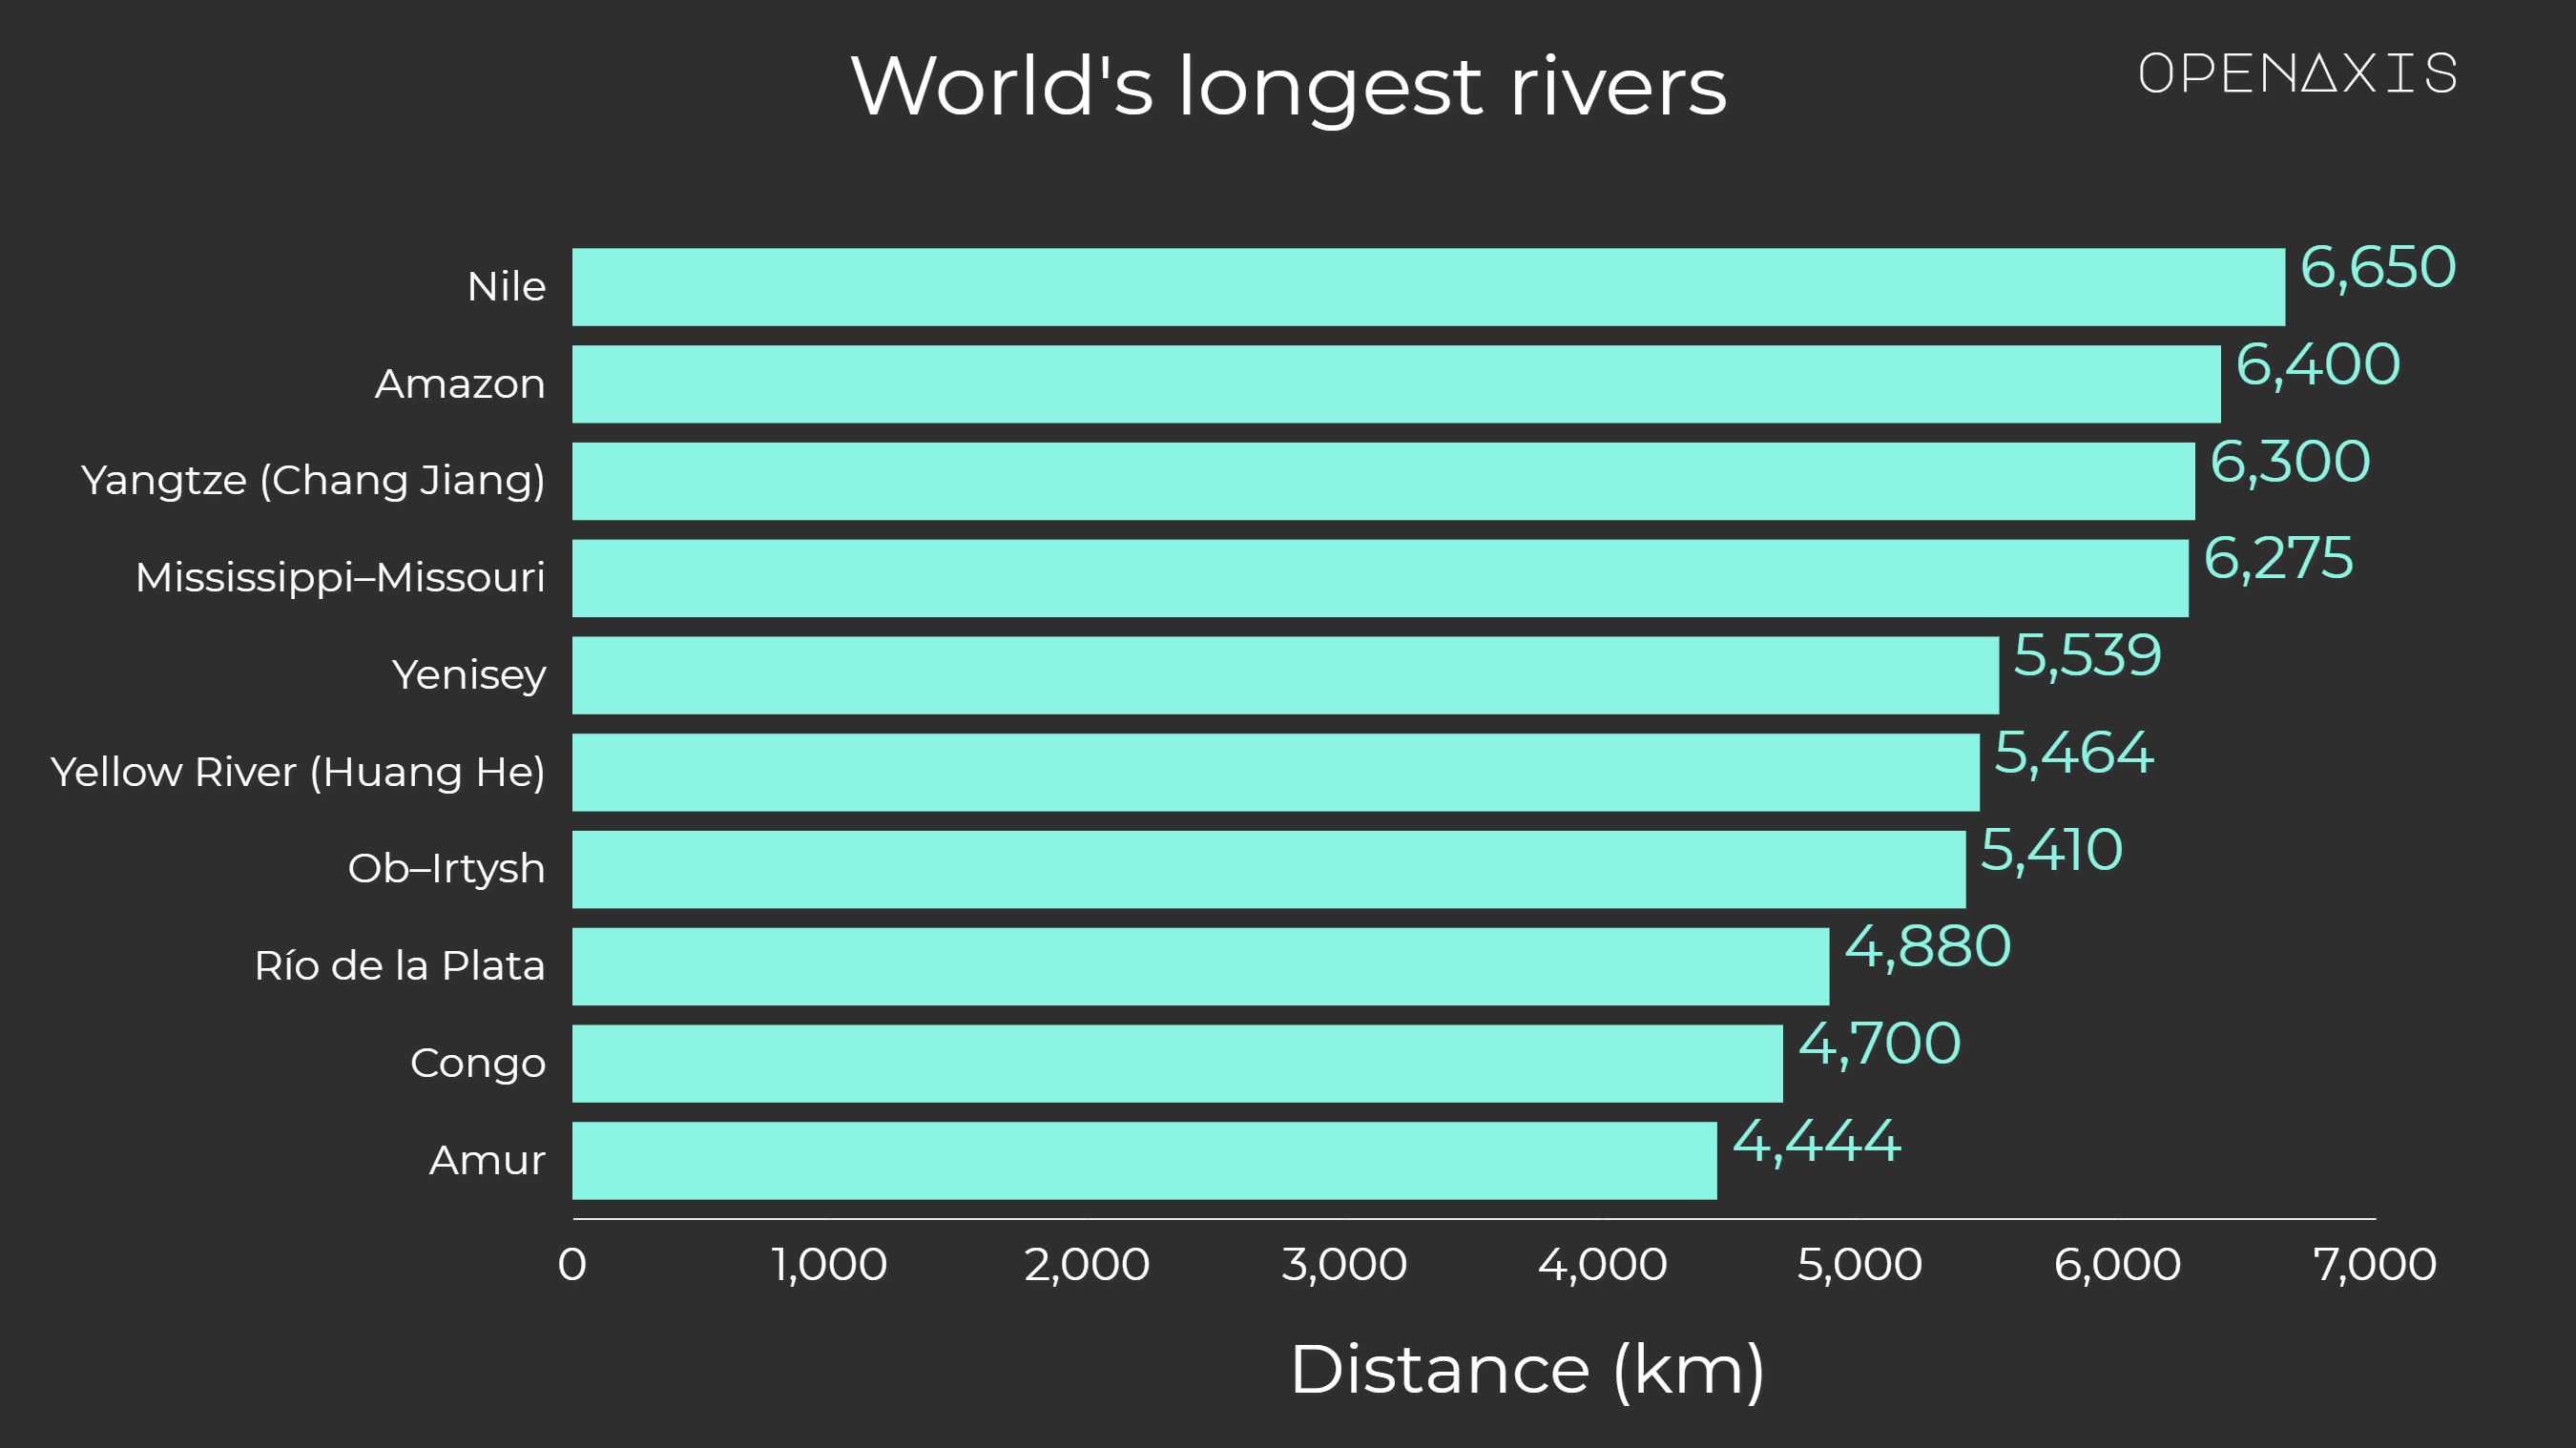 <p>Rivers are defined as natural flowing freshwater bodies that move from a high elevation to a lower elevation, finally draining into oceans, lakes, seas, or other rivers. It is challenging to precisely determine the world's longest river from so many long rivers located throughout the different continents of the planet.</p><p><br /></p><p>Although most of us believe that the Nile River is the longest, some scholars have claimed that the Amazon River is the longest of all rivers. In 2009, a peer-reviewed article published in the <em>"International Journal of Digital Earth"</em> cleared the confusion and declared the Nile River - the longest river in the world.</p><p><br /></p><p>This is a list of the top 10 longest rivers on Earth. It includes river systems over 1,000 kilometers (620 mi).</p><p><br /></p><p><span data-index="0" data-denotation-char data-id="0" data-value="&lt;a href=&quot;/search?q=%23rivers&quot; target=_self&gt;#rivers" data-link="/search?q=%23rivers">﻿<span contenteditable="false"><span></span><a href="/search?q=%23rivers" target="_self">#rivers</a></span>﻿</span> <span data-index="0" data-denotation-char data-id="0" data-value="&lt;a href=&quot;/search?q=%23geography&quot; target=_self&gt;#geography" data-link="/search?q=%23geography">﻿<span contenteditable="false"><span></span><a href="/search?q=%23geography" target="_self">#geography</a></span>﻿</span></p><p><br /></p><p>Source: <a href="/data/3863" target="_blank">USGS, Wikipedia</a></p><p><br /></p>